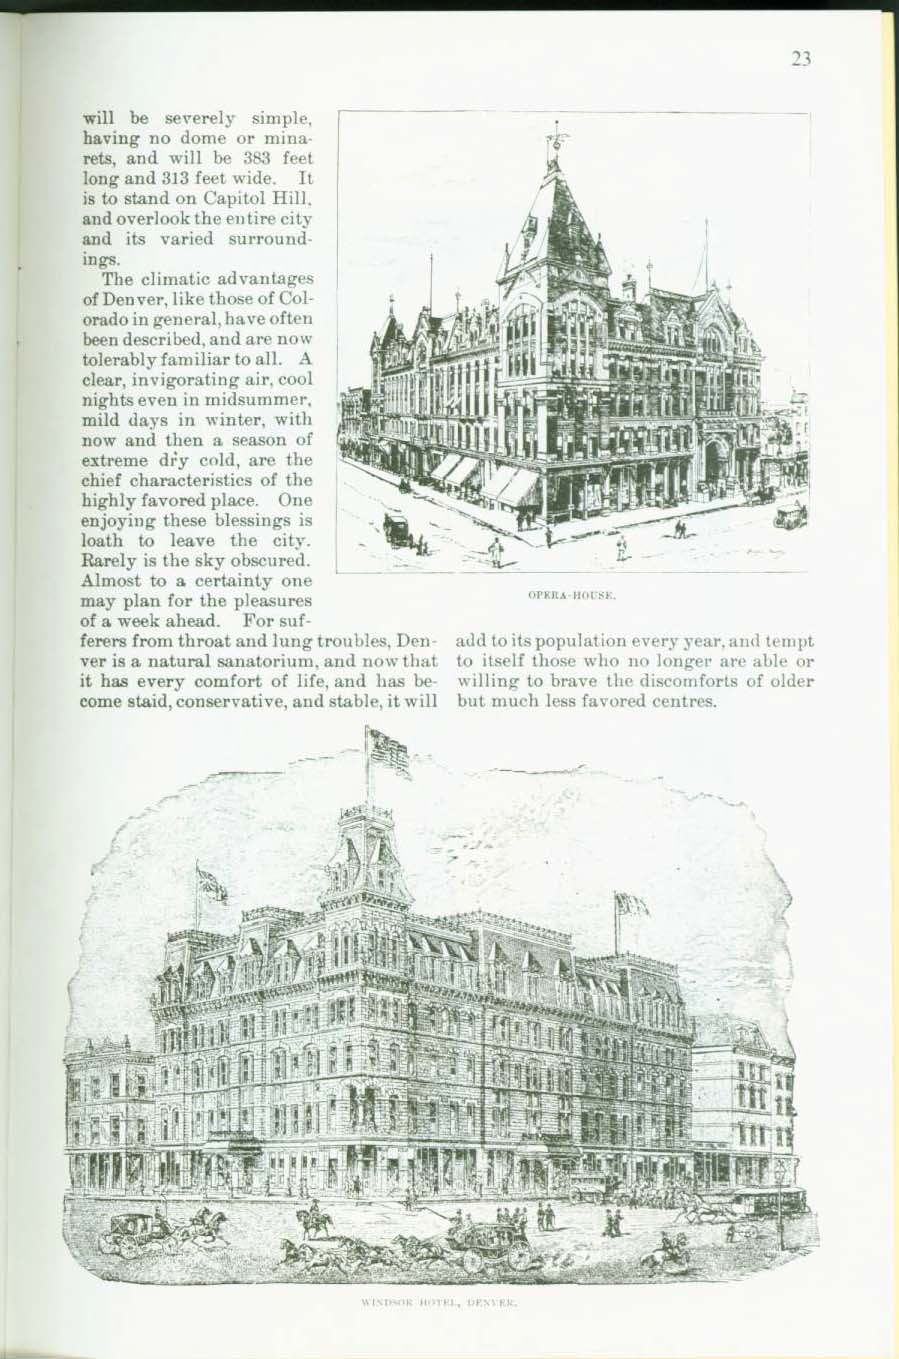 THE CITY OF DENVER, 1888: an early history of "The Queen City of the Plains". vist0006l